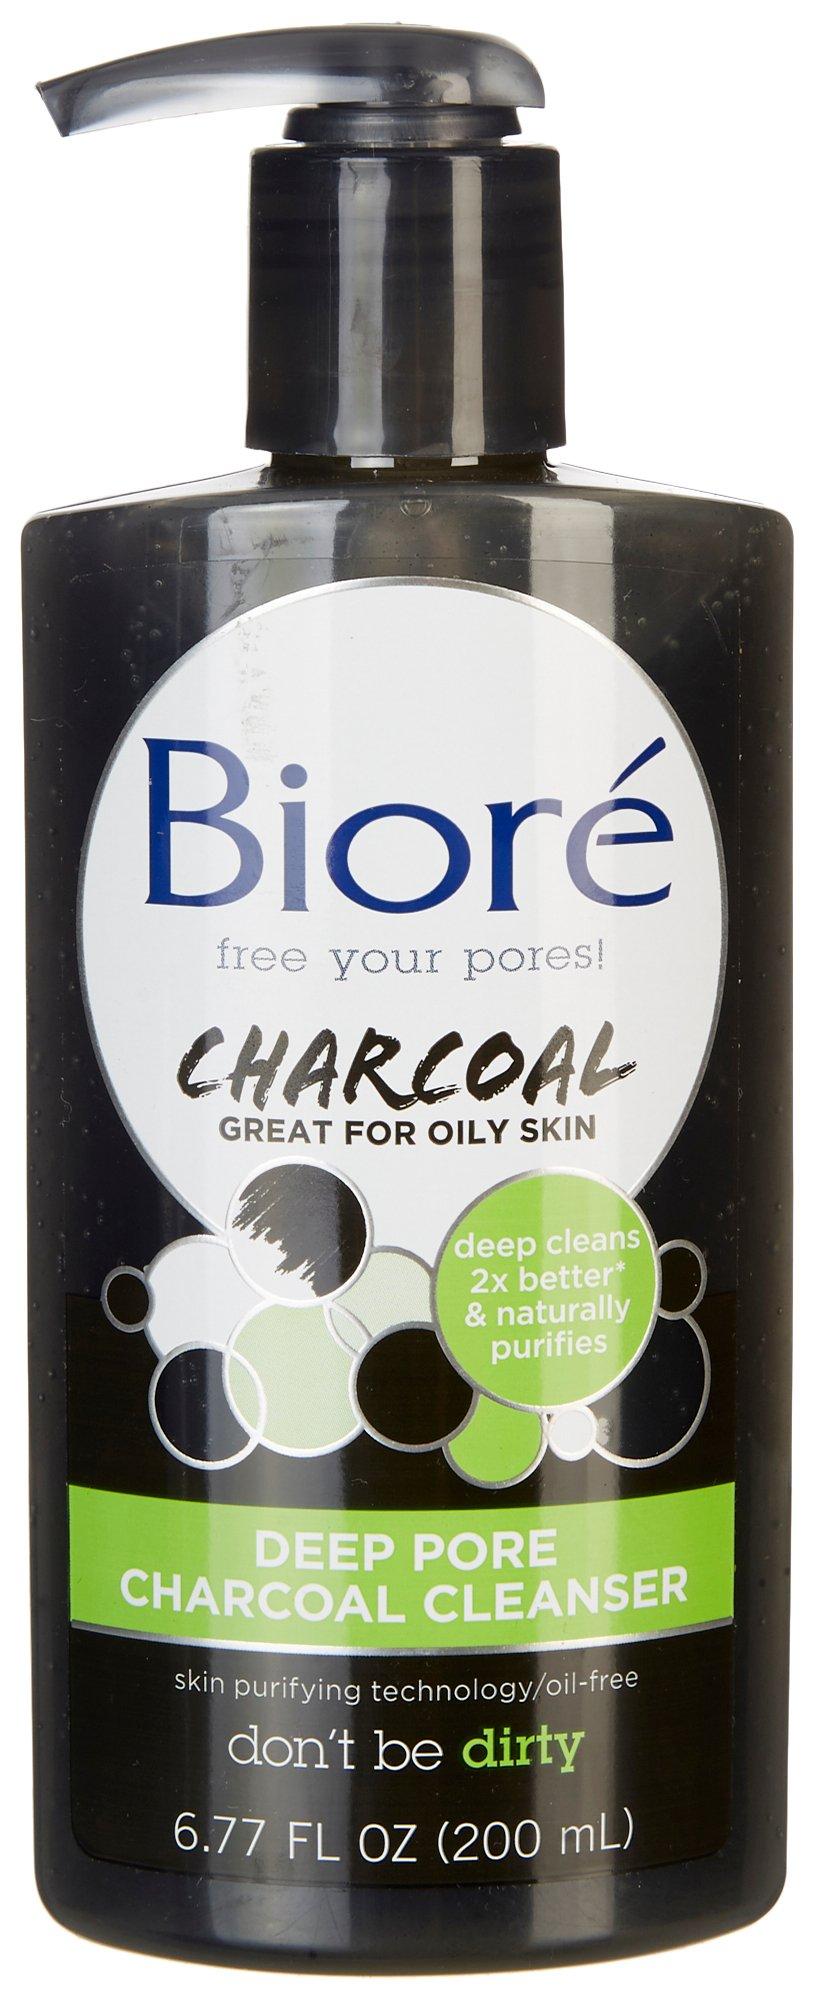 Deep Pore Charcoal Cleanser For Oily Skin 6.77 fl. oz.